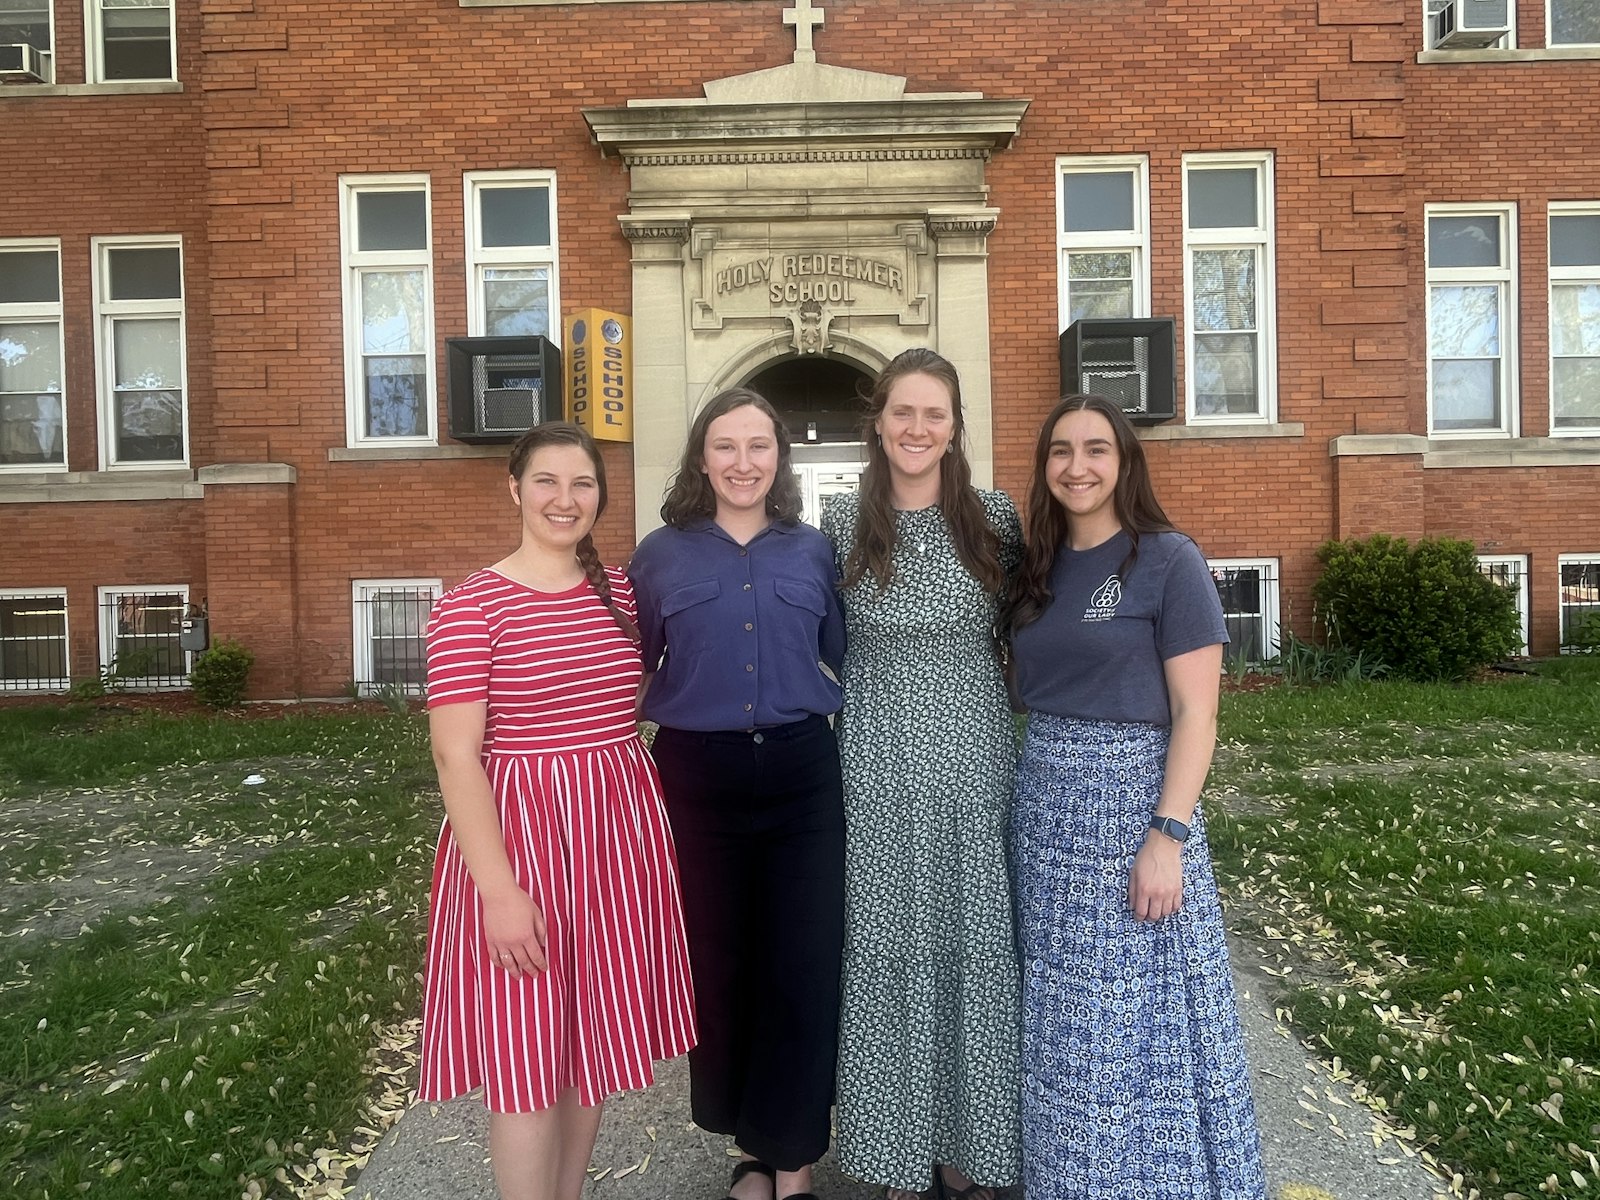 Left to right, Brianna Moreland, Sarah Niekamp, Claire McElroy and Bernadette Re serve as SOLT missionary volunteers at Holy Redeemer Catholic School in Detroit.